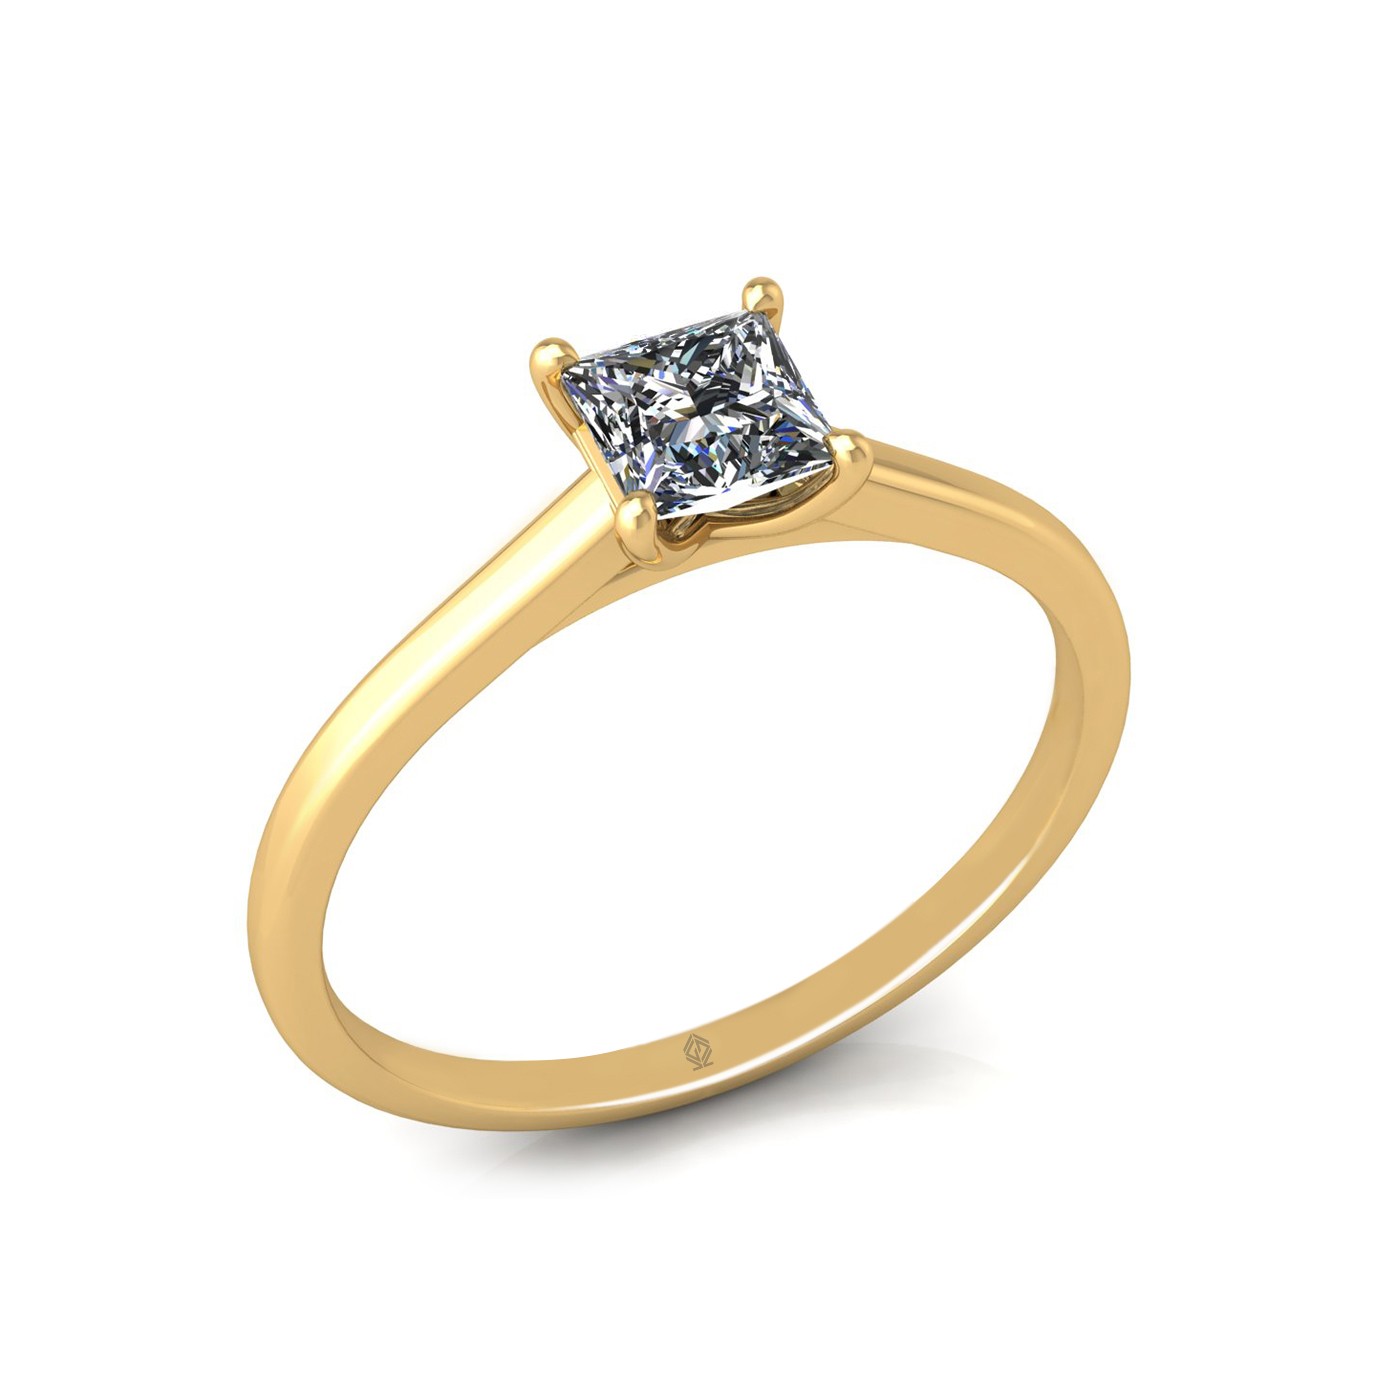 18k yellow gold  0,50 ct 4 prongs solitaire princess cut diamond engagement ring with whisper thin band